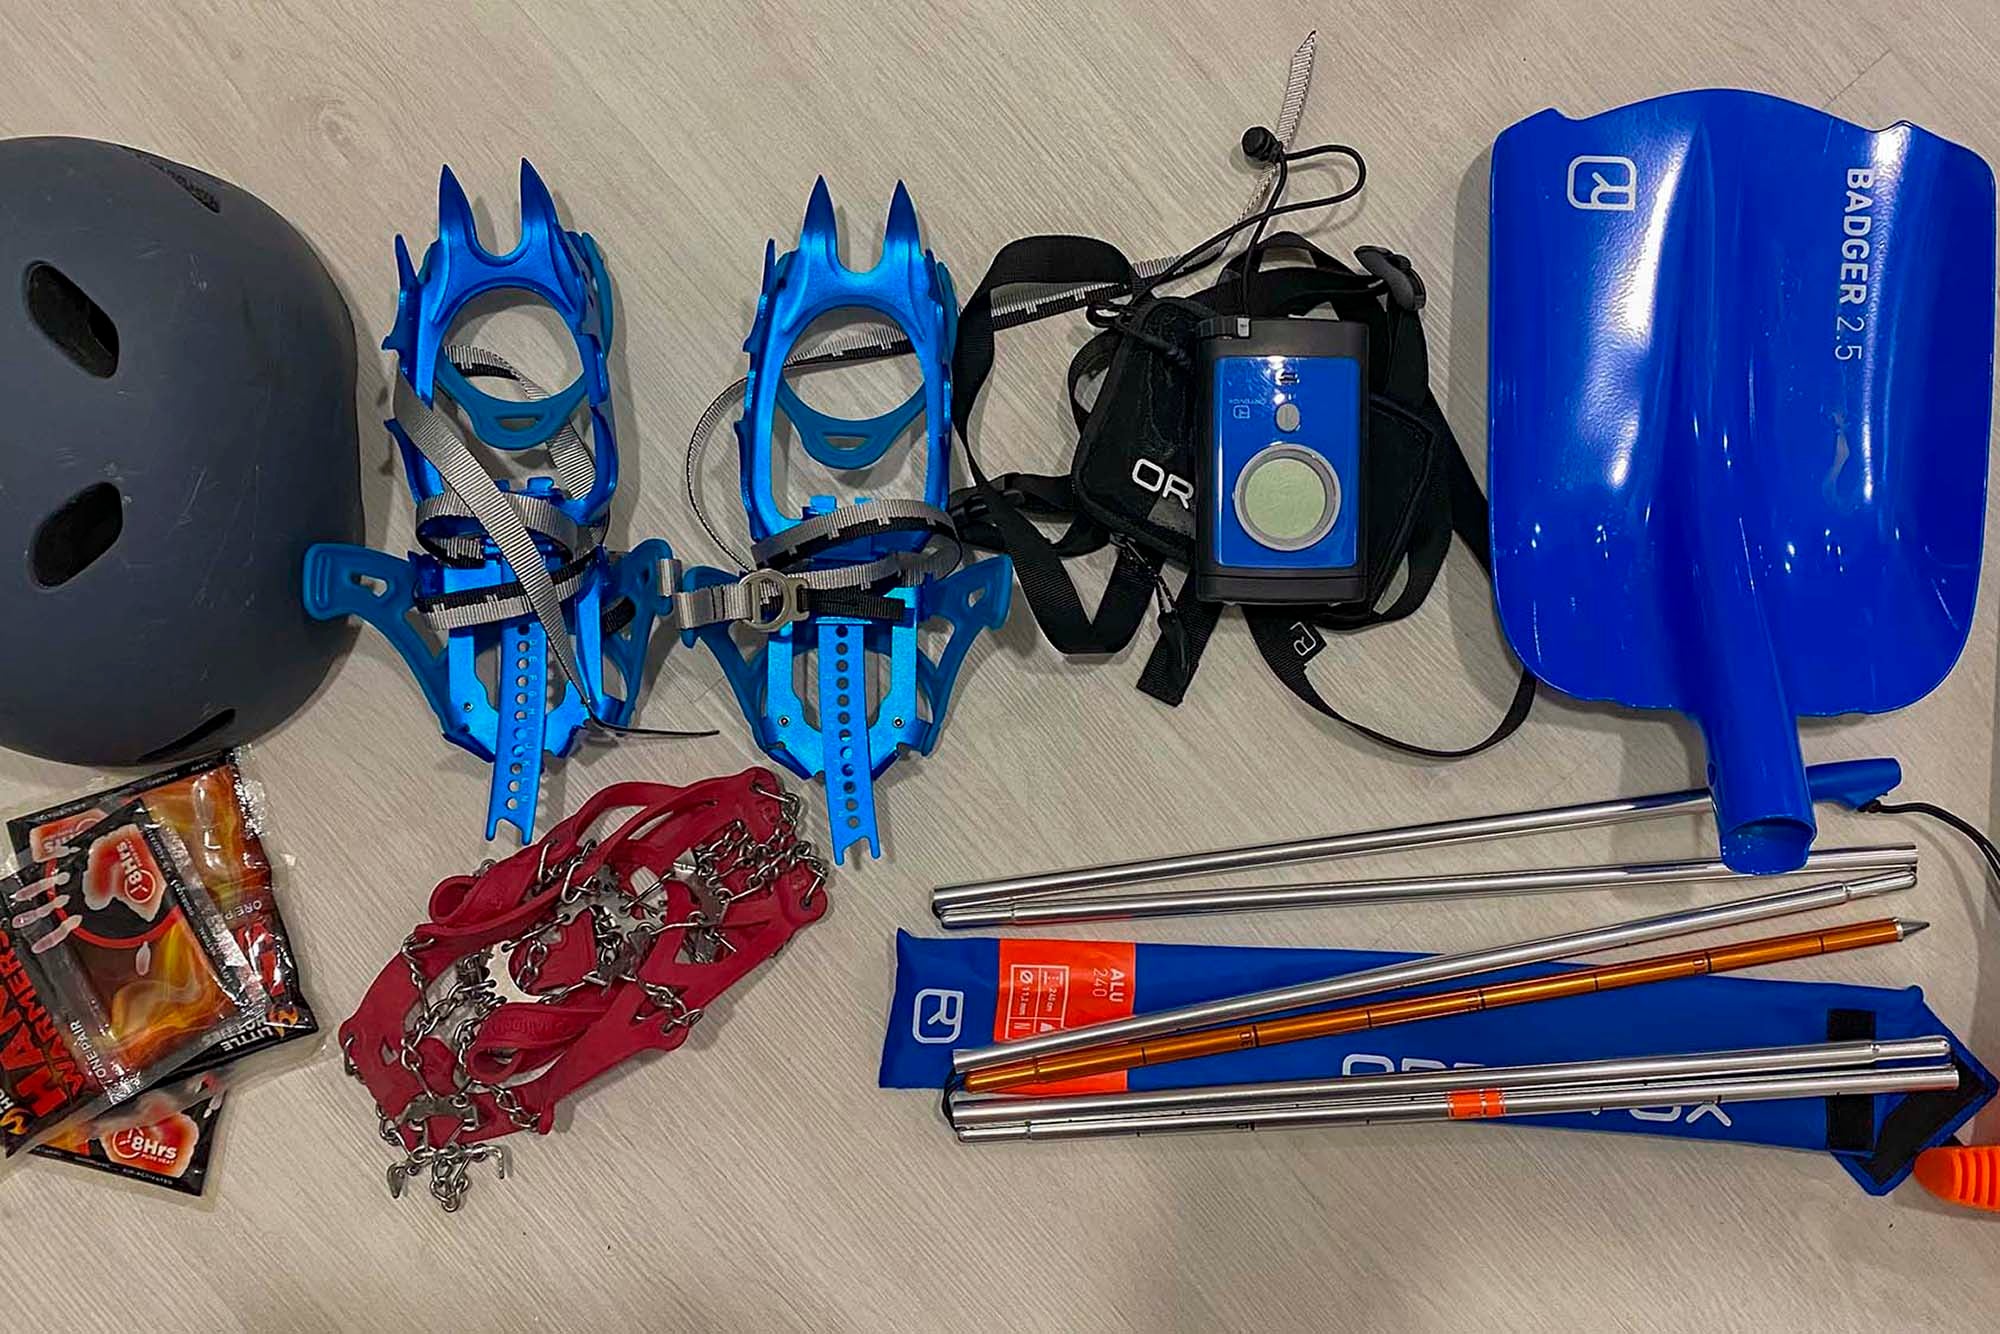 An assortment of useful safety gear for ice exploring